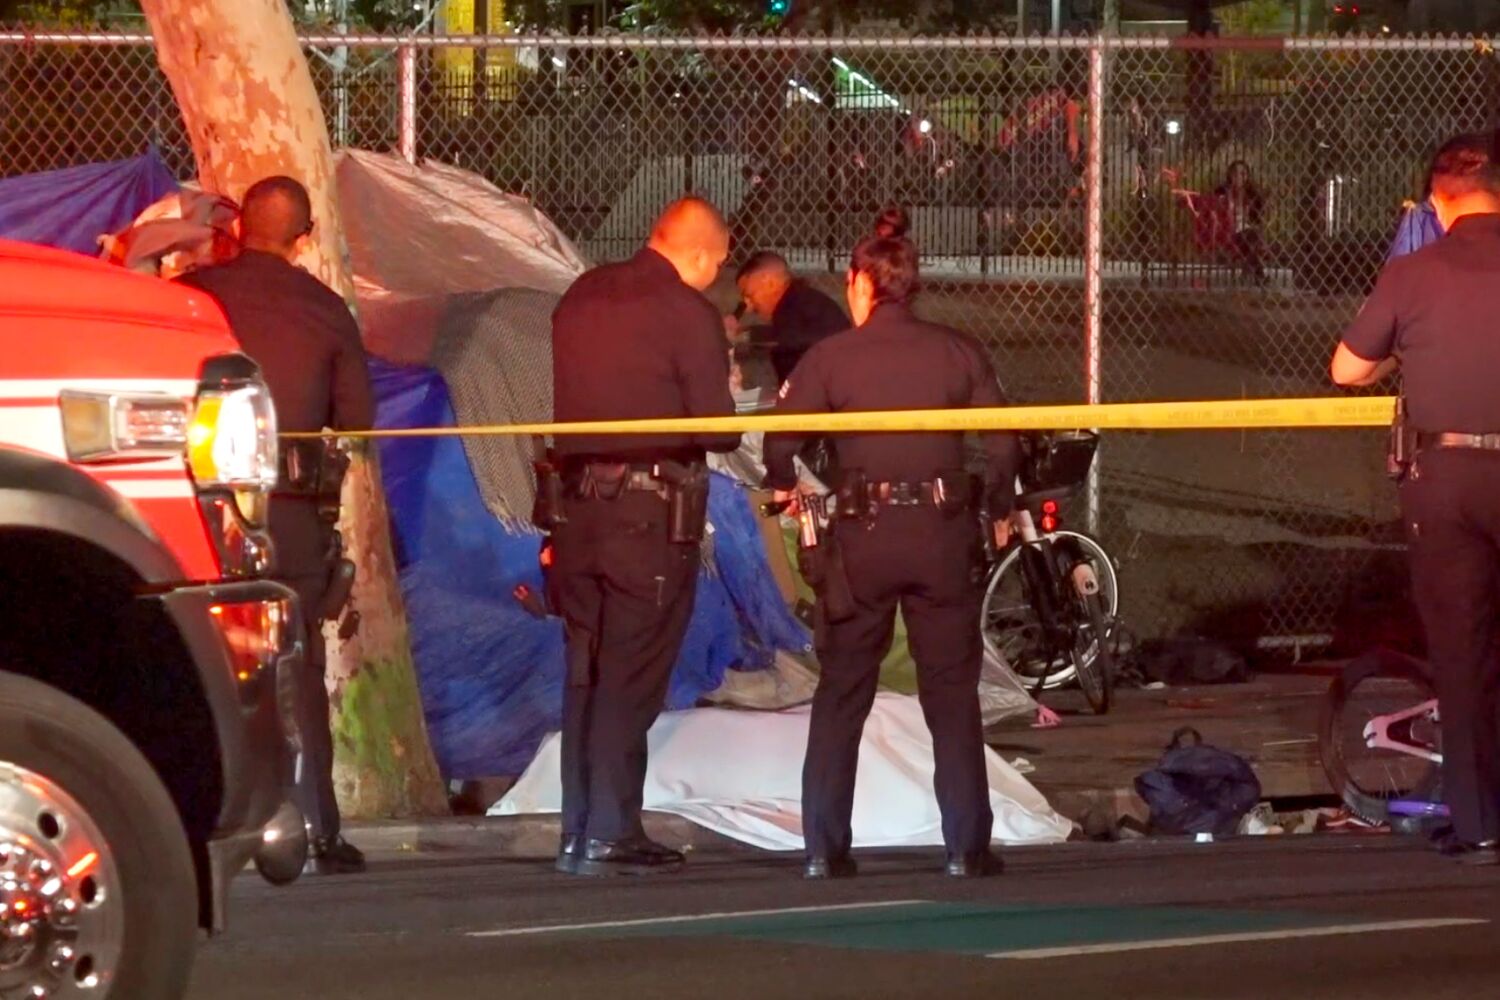 Man shot and killed at homeless encampment in front of L.A. City Hall